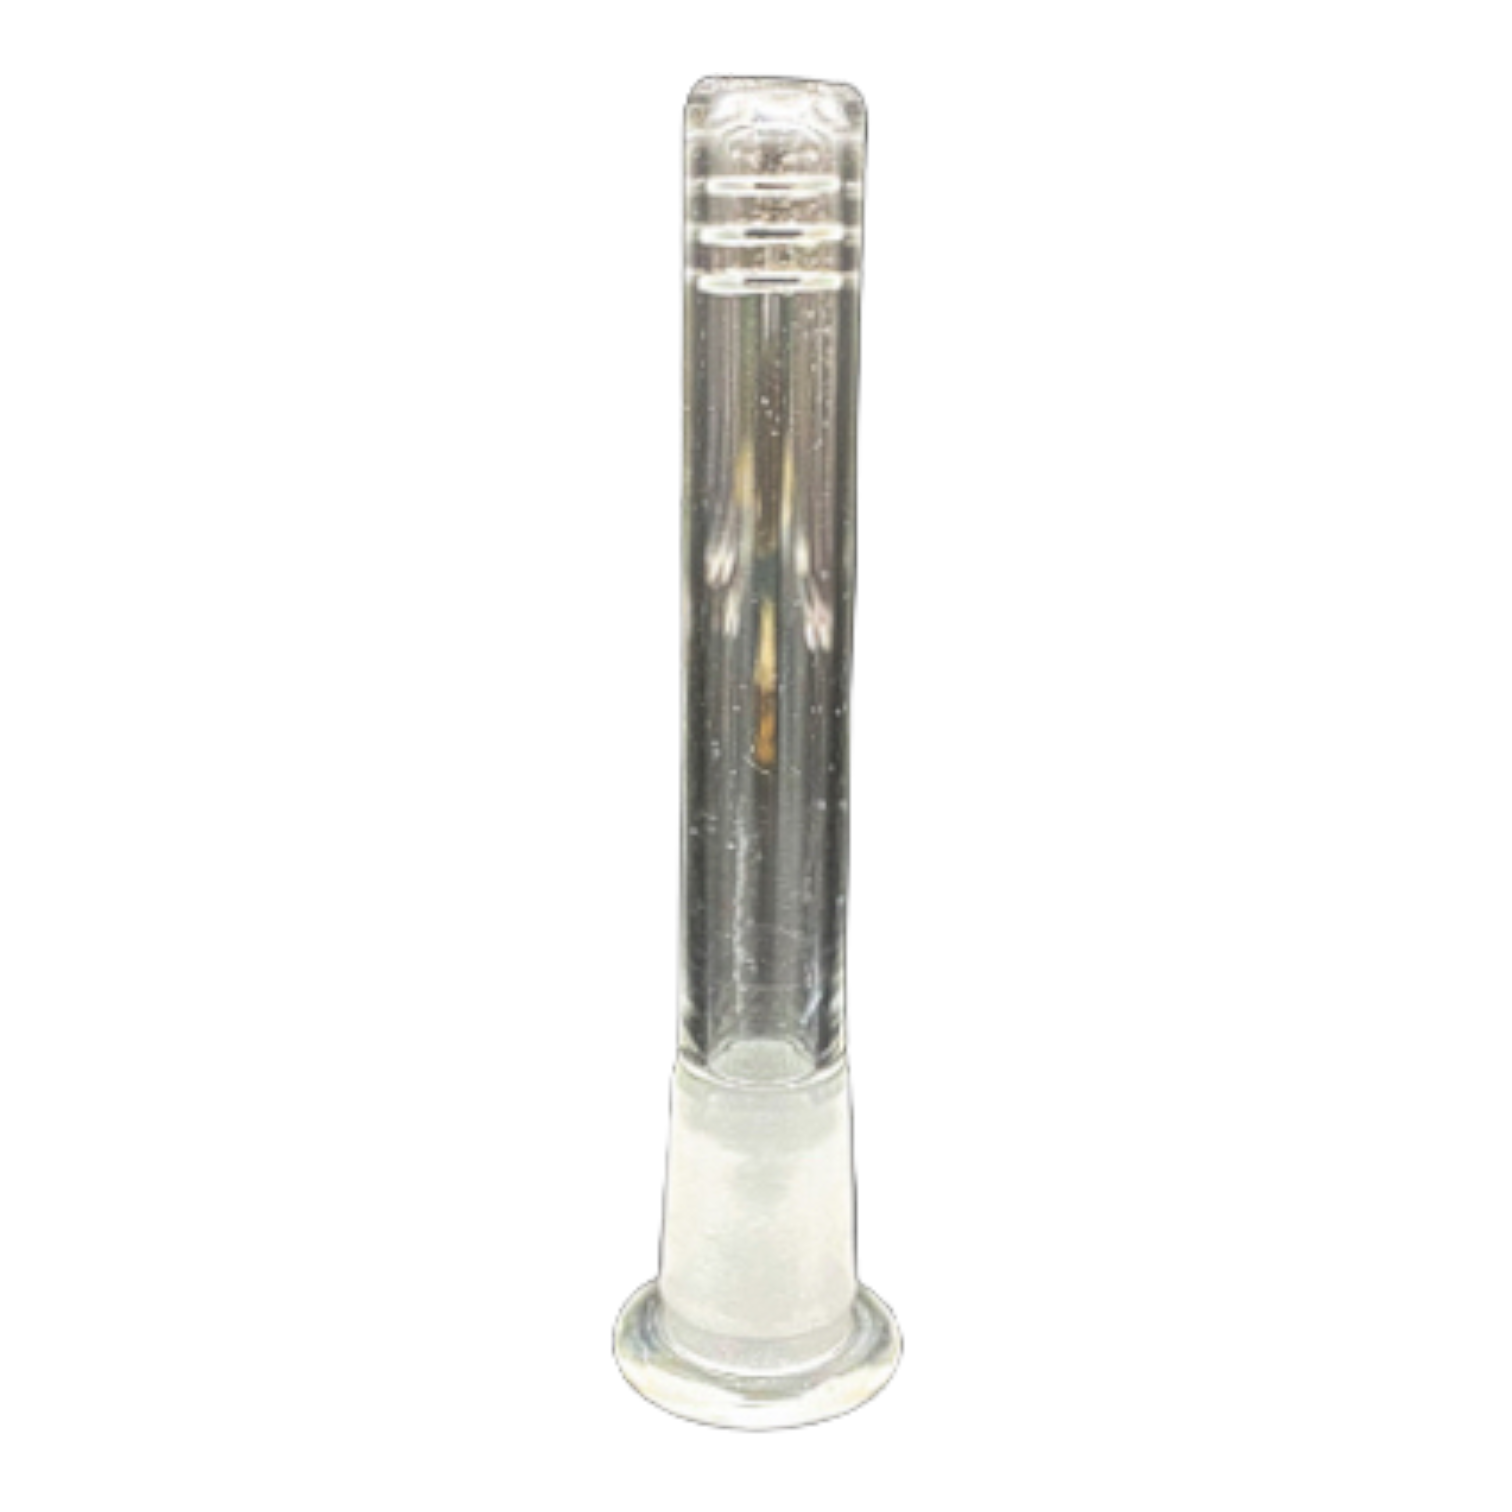 a large selection of downstems or downtubes for glass bongs available in clear, pink, green, black